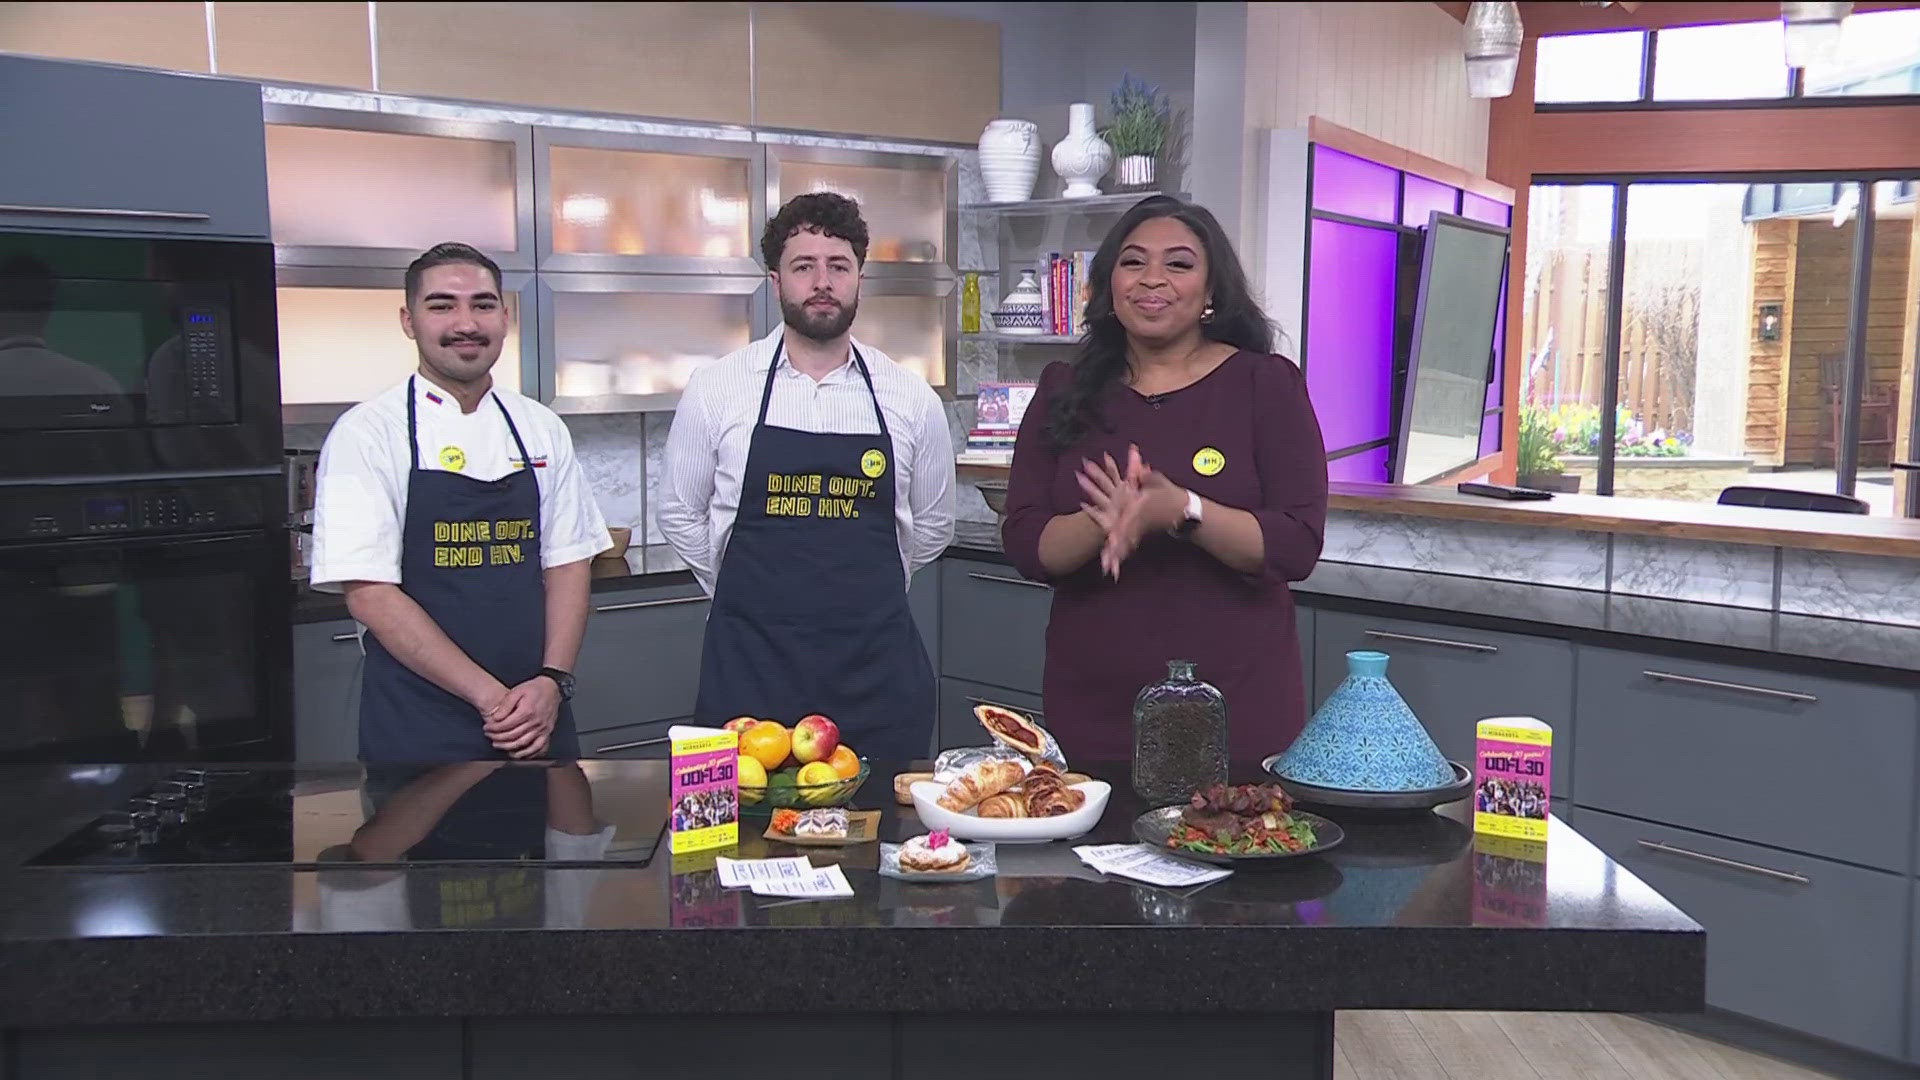 Director of operations Eli Fhima and chef Marco Leon Gil visited KARE 11 News at Noon to share some delightful food and talk about Dining Out For Life.